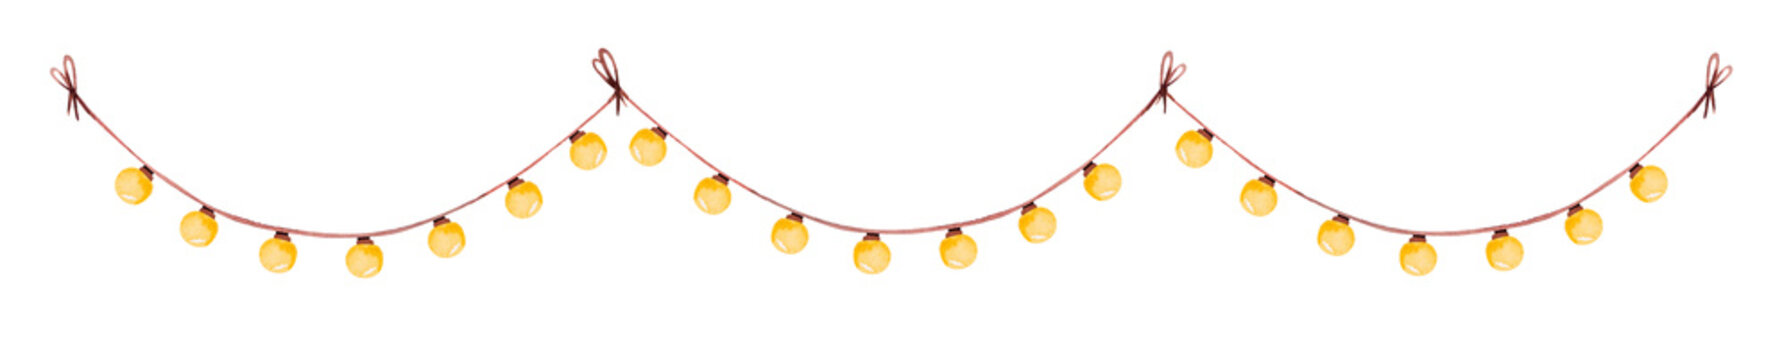 Garland with lamps, design element in cartoon style for greeting card.